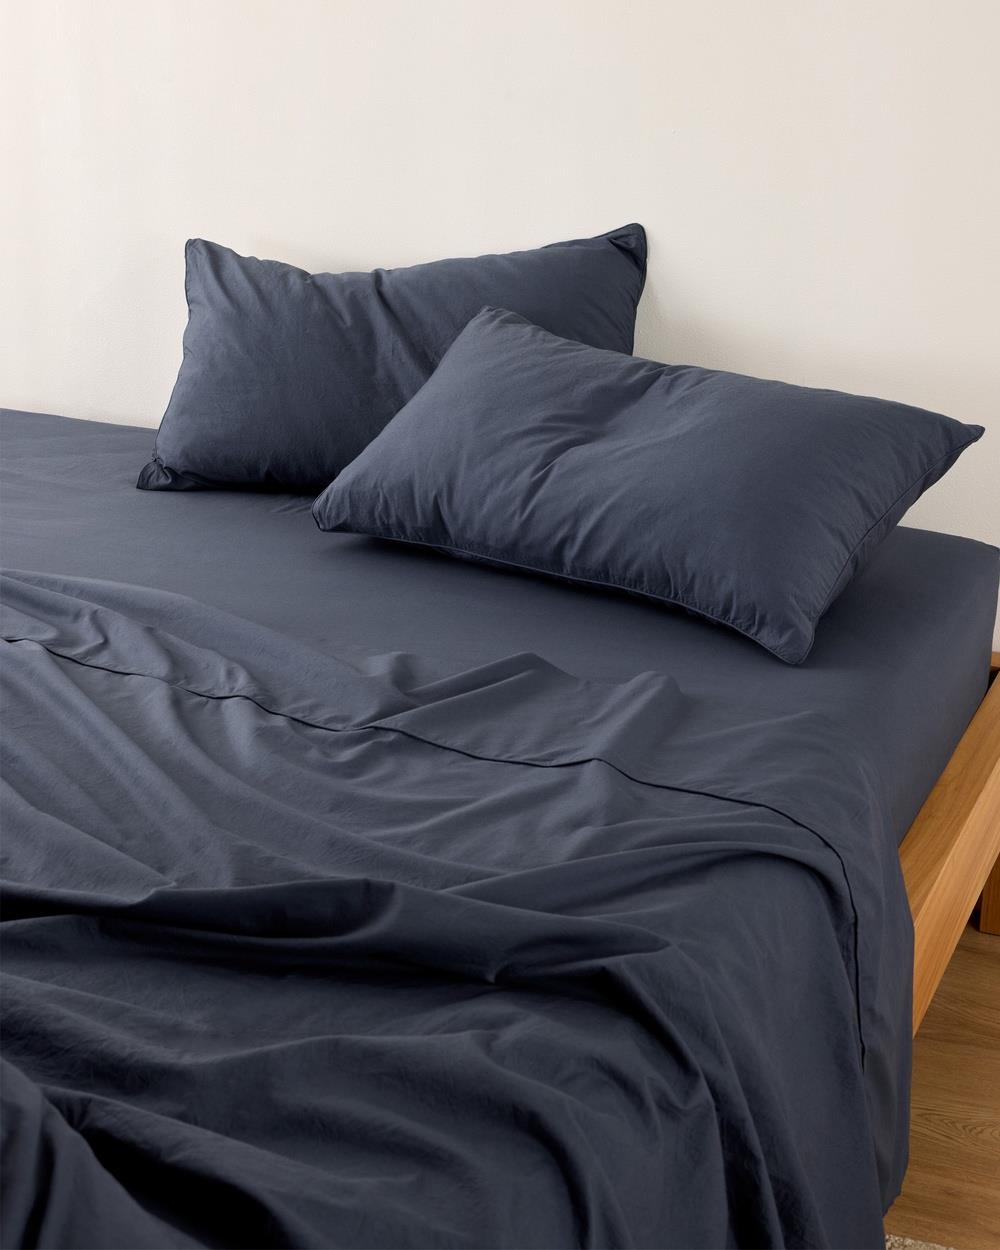 Sheet Society - Leo Washed Cotton Fitted Sheet Set - Home (Blue) Leo Washed Cotton Fitted Sheet Set